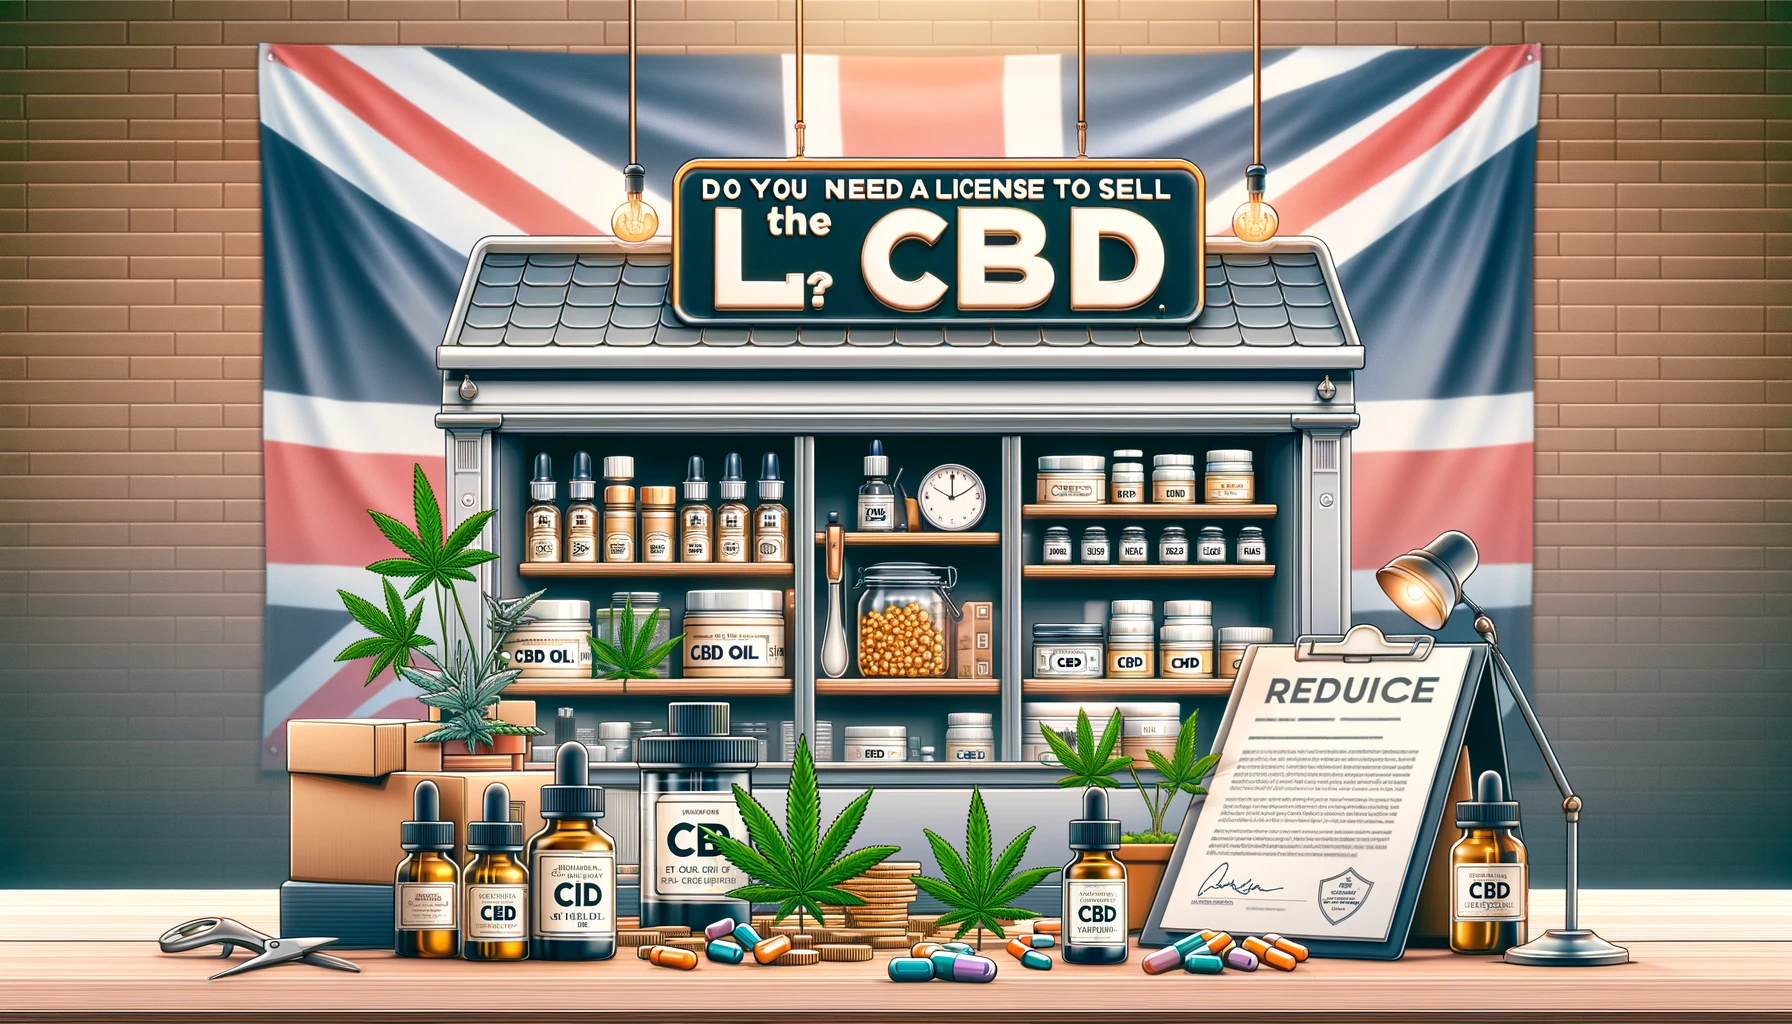 License to Sell CBD in the UK